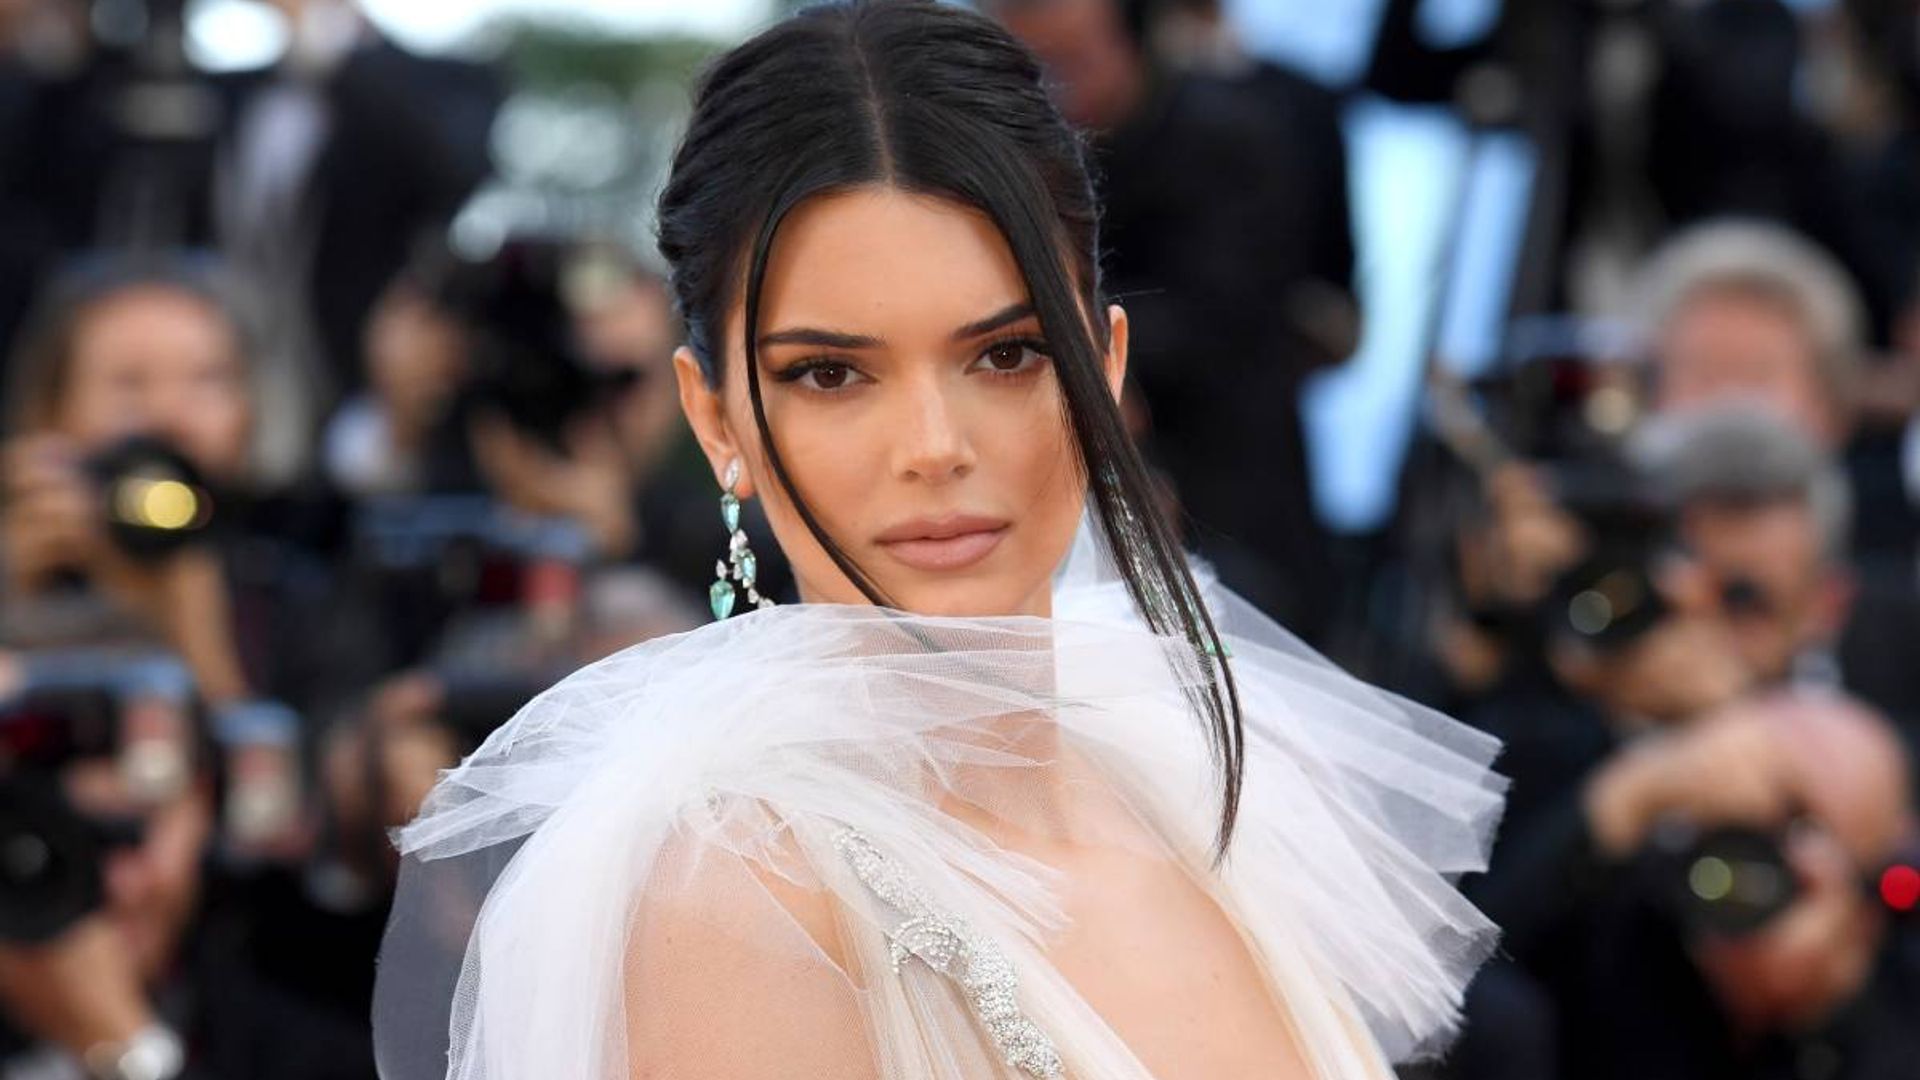 Kendall Jenner stuns in a silky slip dress we want asap on date night with boyfriend Devin Booker 